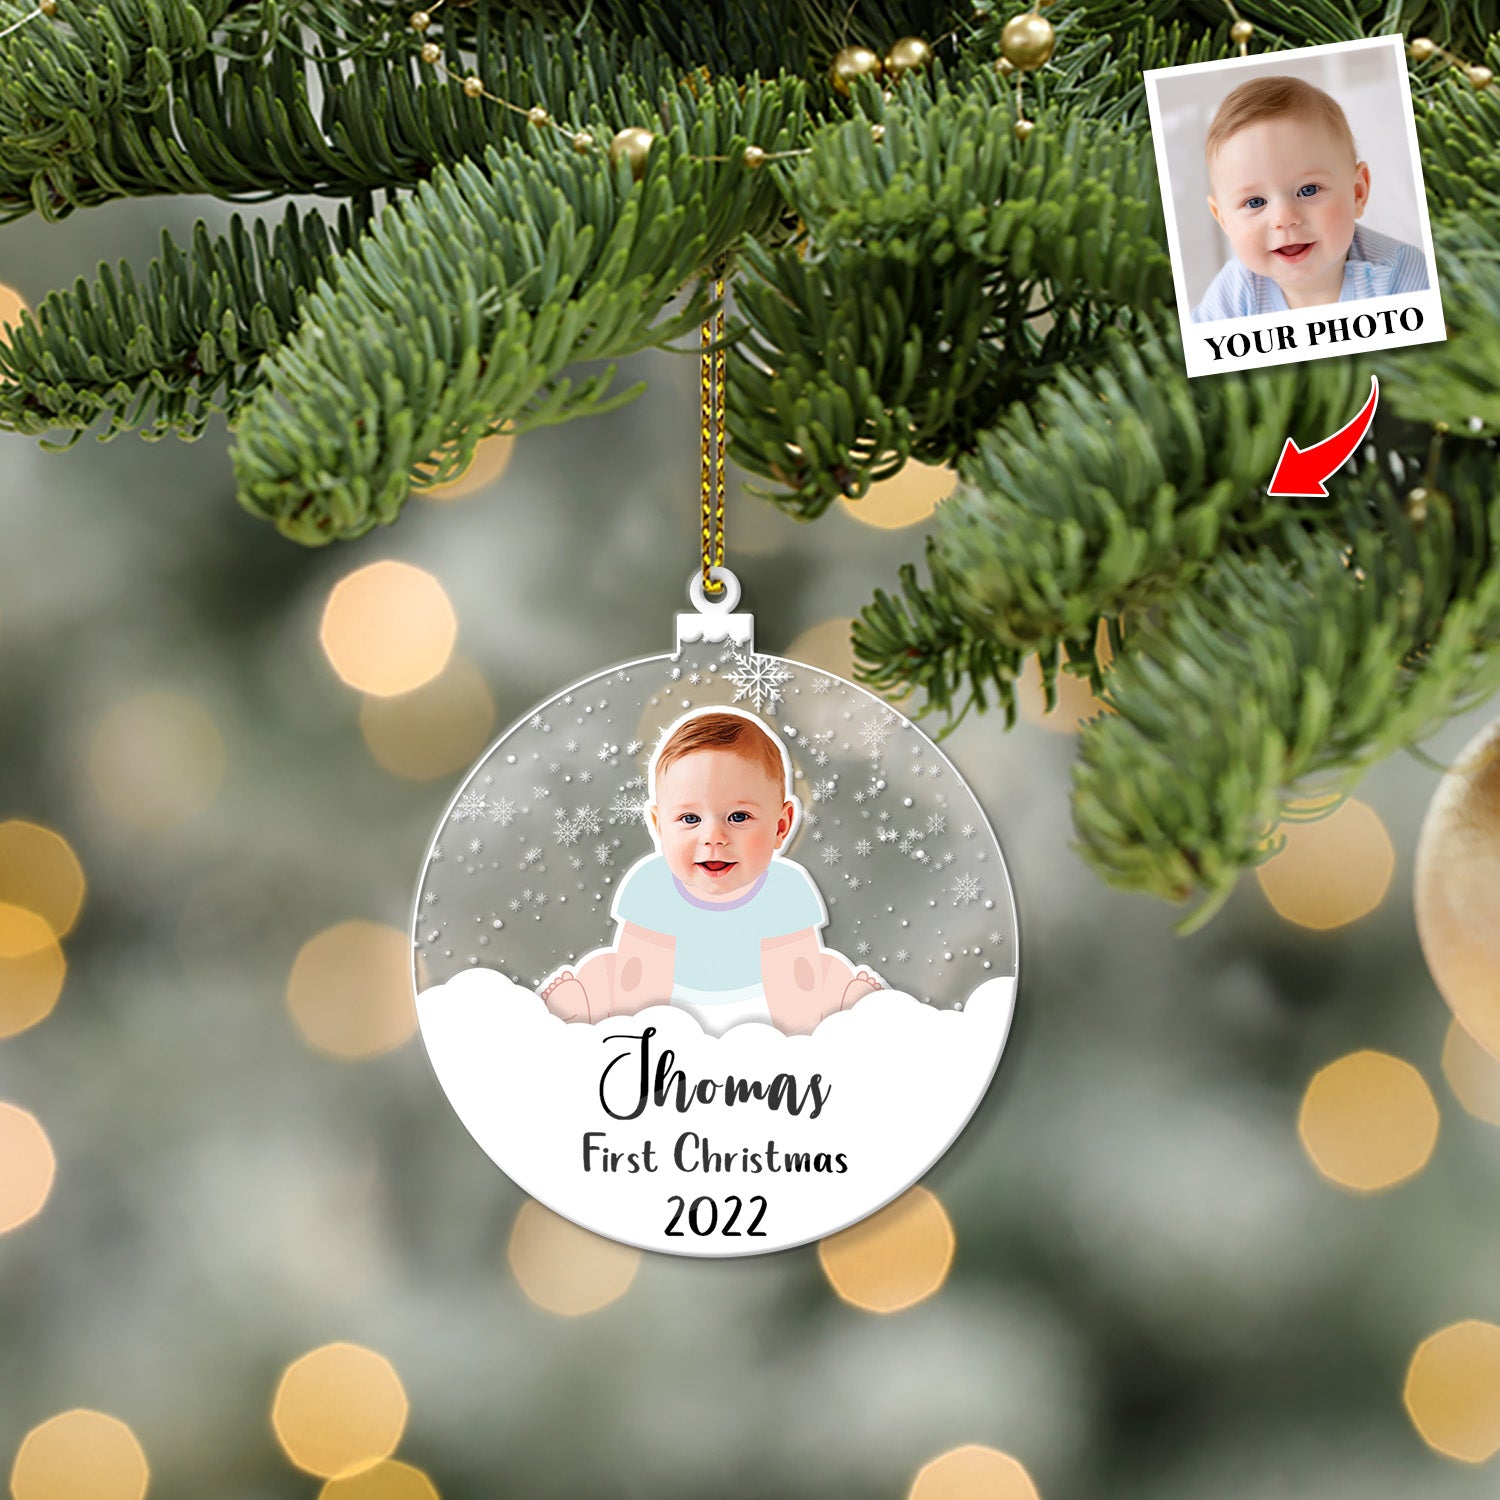 Personalized Name And Photo, Ornament For Baby, Baby's First Christmas, Snowball, Christmas Shape Ornament 2 Sides